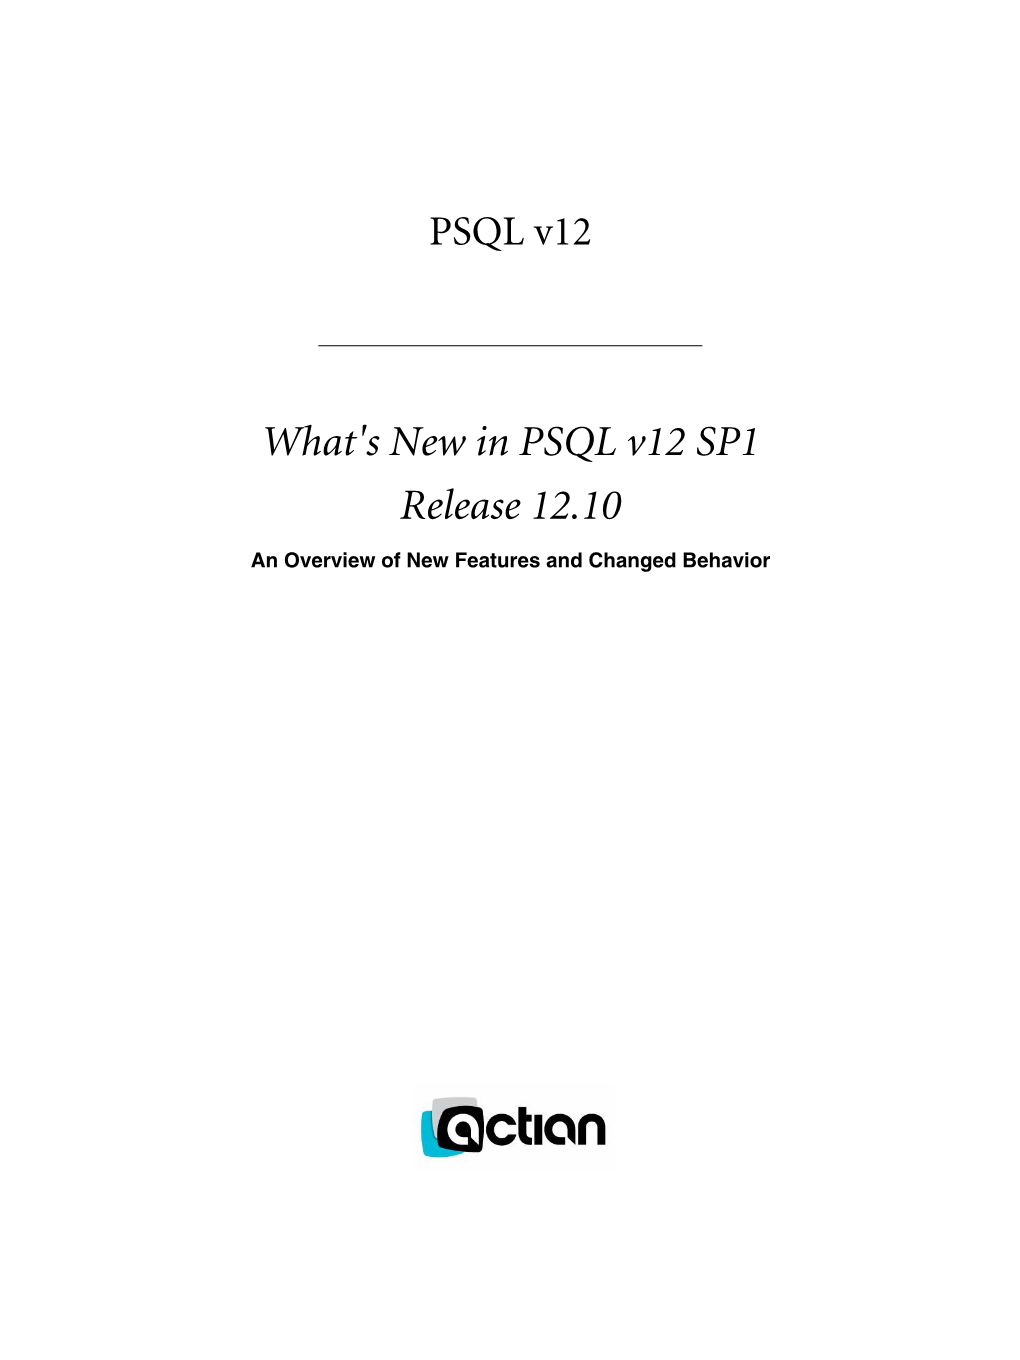 What's New in PSQL V12 SP1 Release 12.10